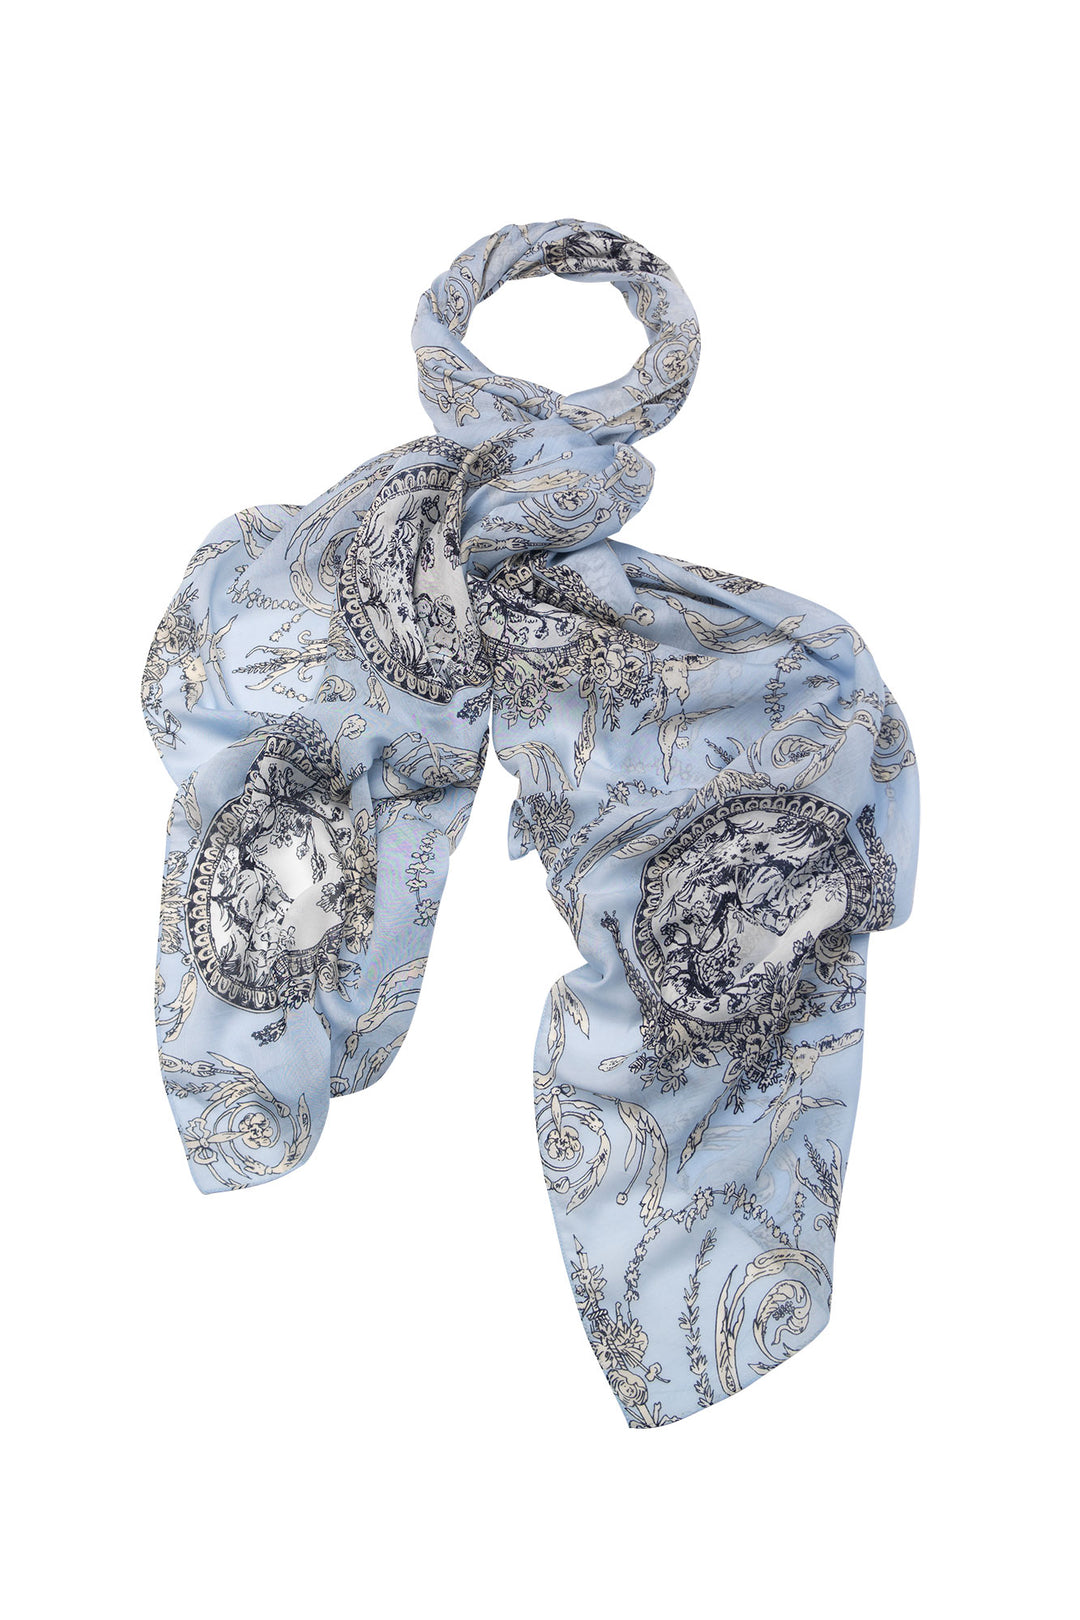 Women's accessories, gifts for her. Large scarf in sky blue with valentine floral print by One Hundred Stars